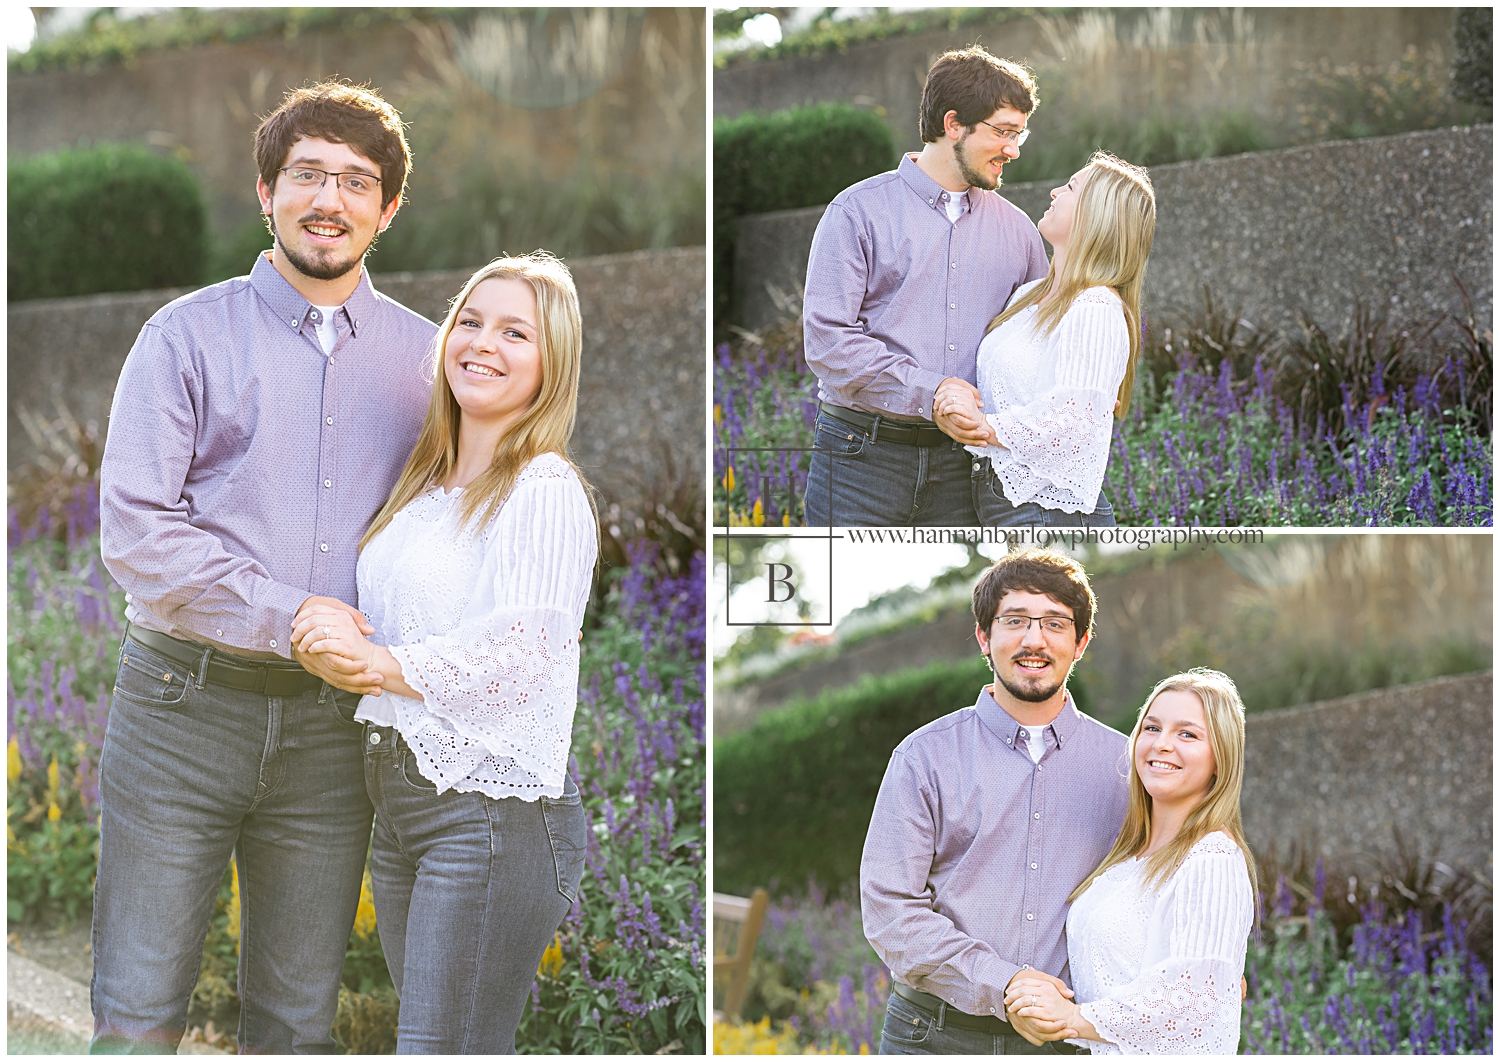 Couple standing in front of purple flowers with sunny glow around them.